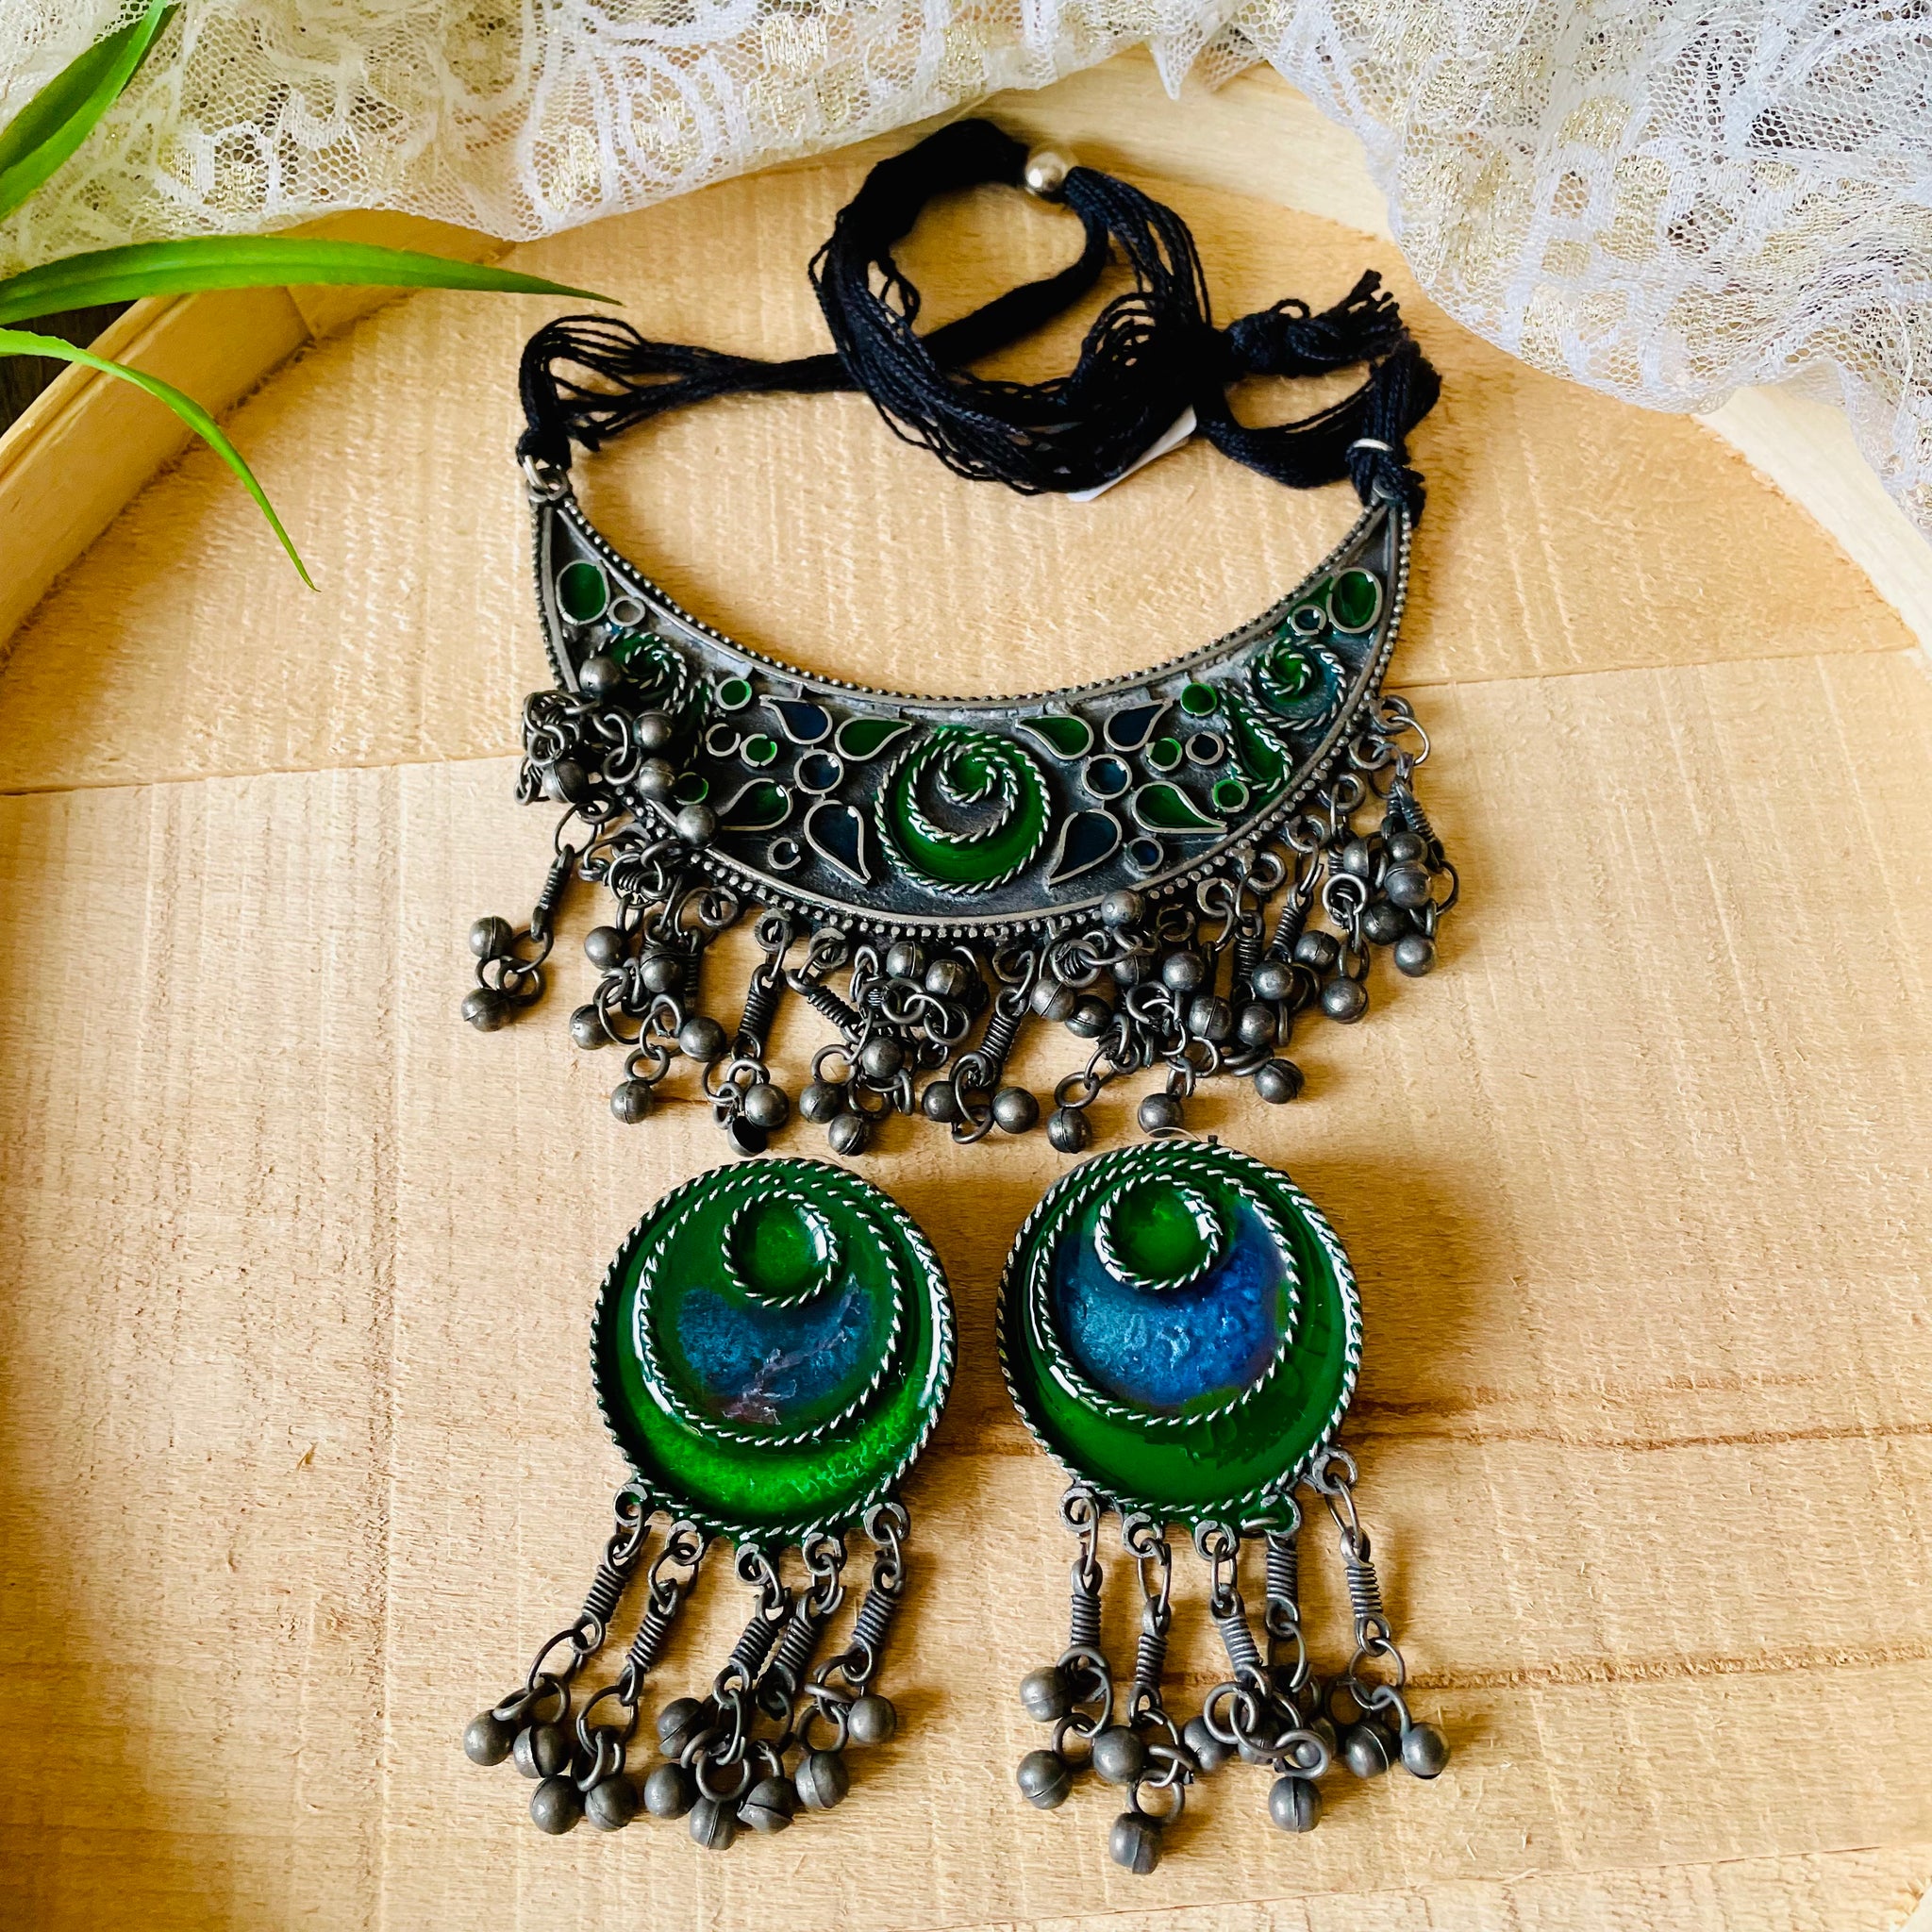 Green and Blue Indian Afghani Oxidized Necklace with matching earrings